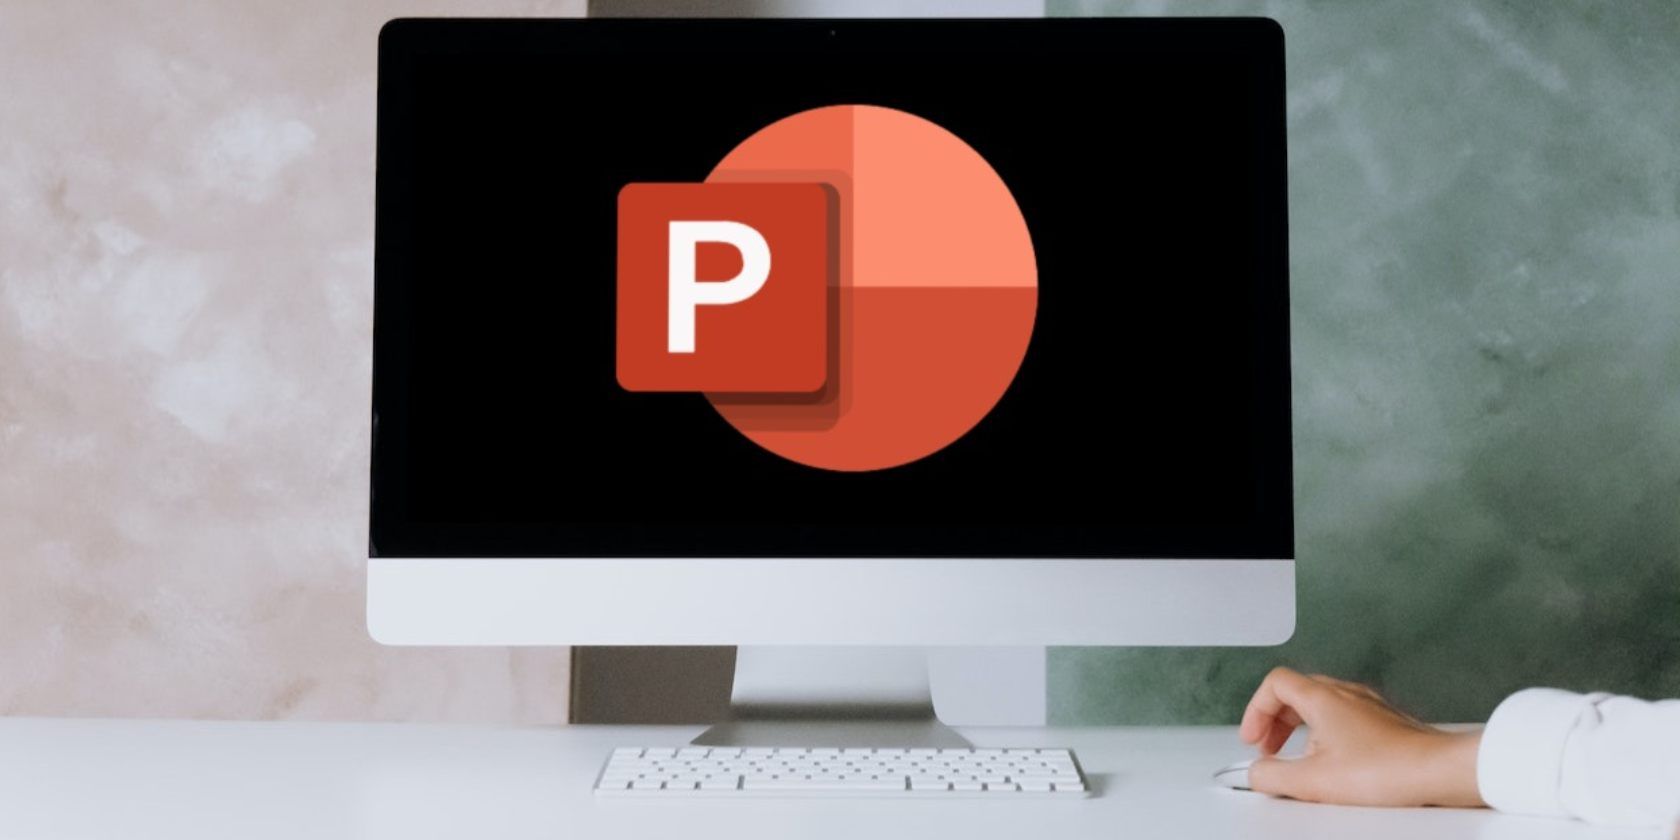 How to Create Action Buttons in Microsoft PowerPoint